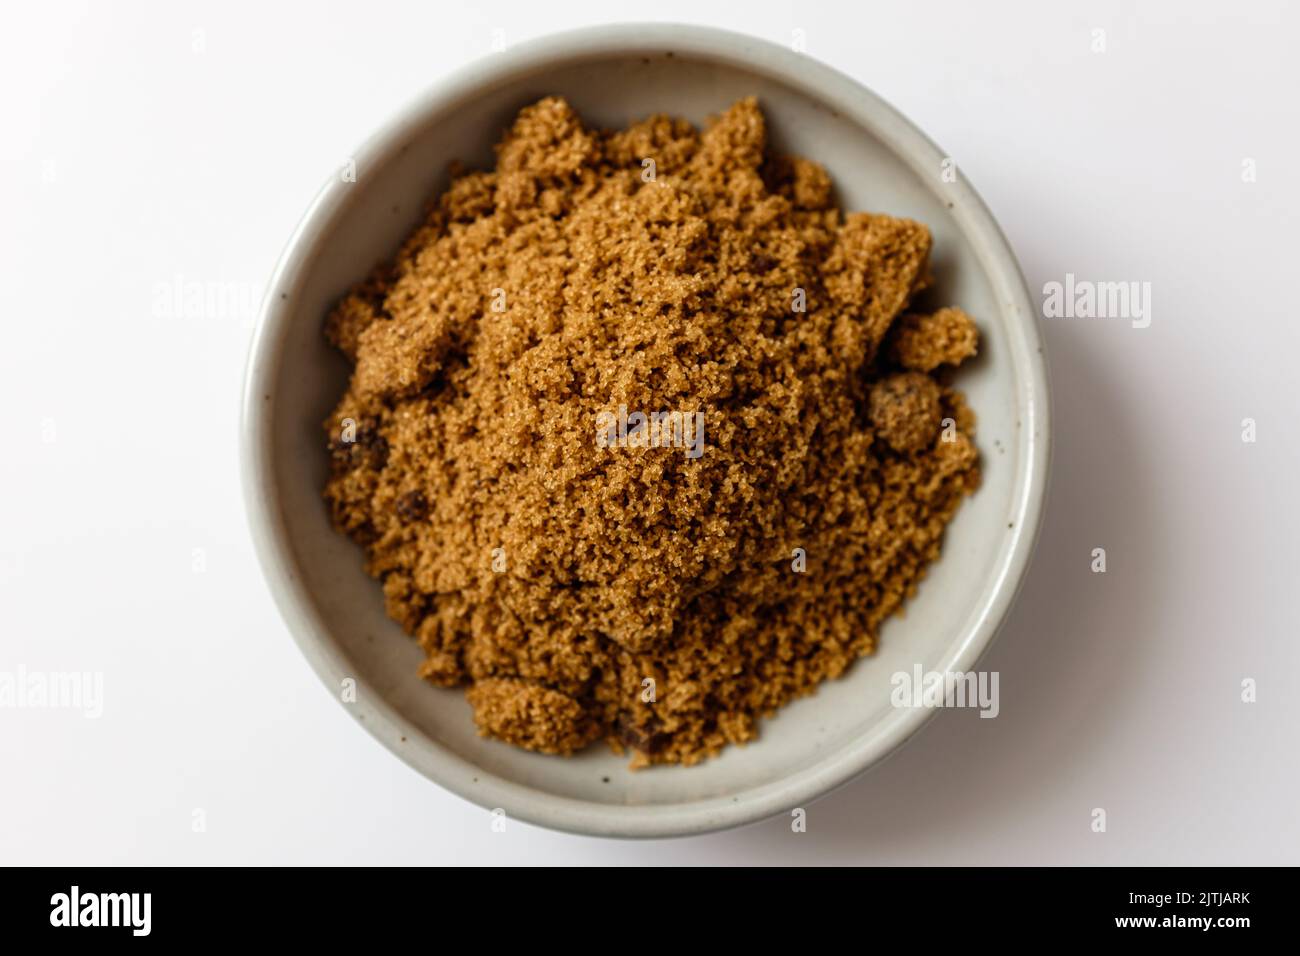 unrefined sugar. food made from sugarcane. sweet food Stock Photo